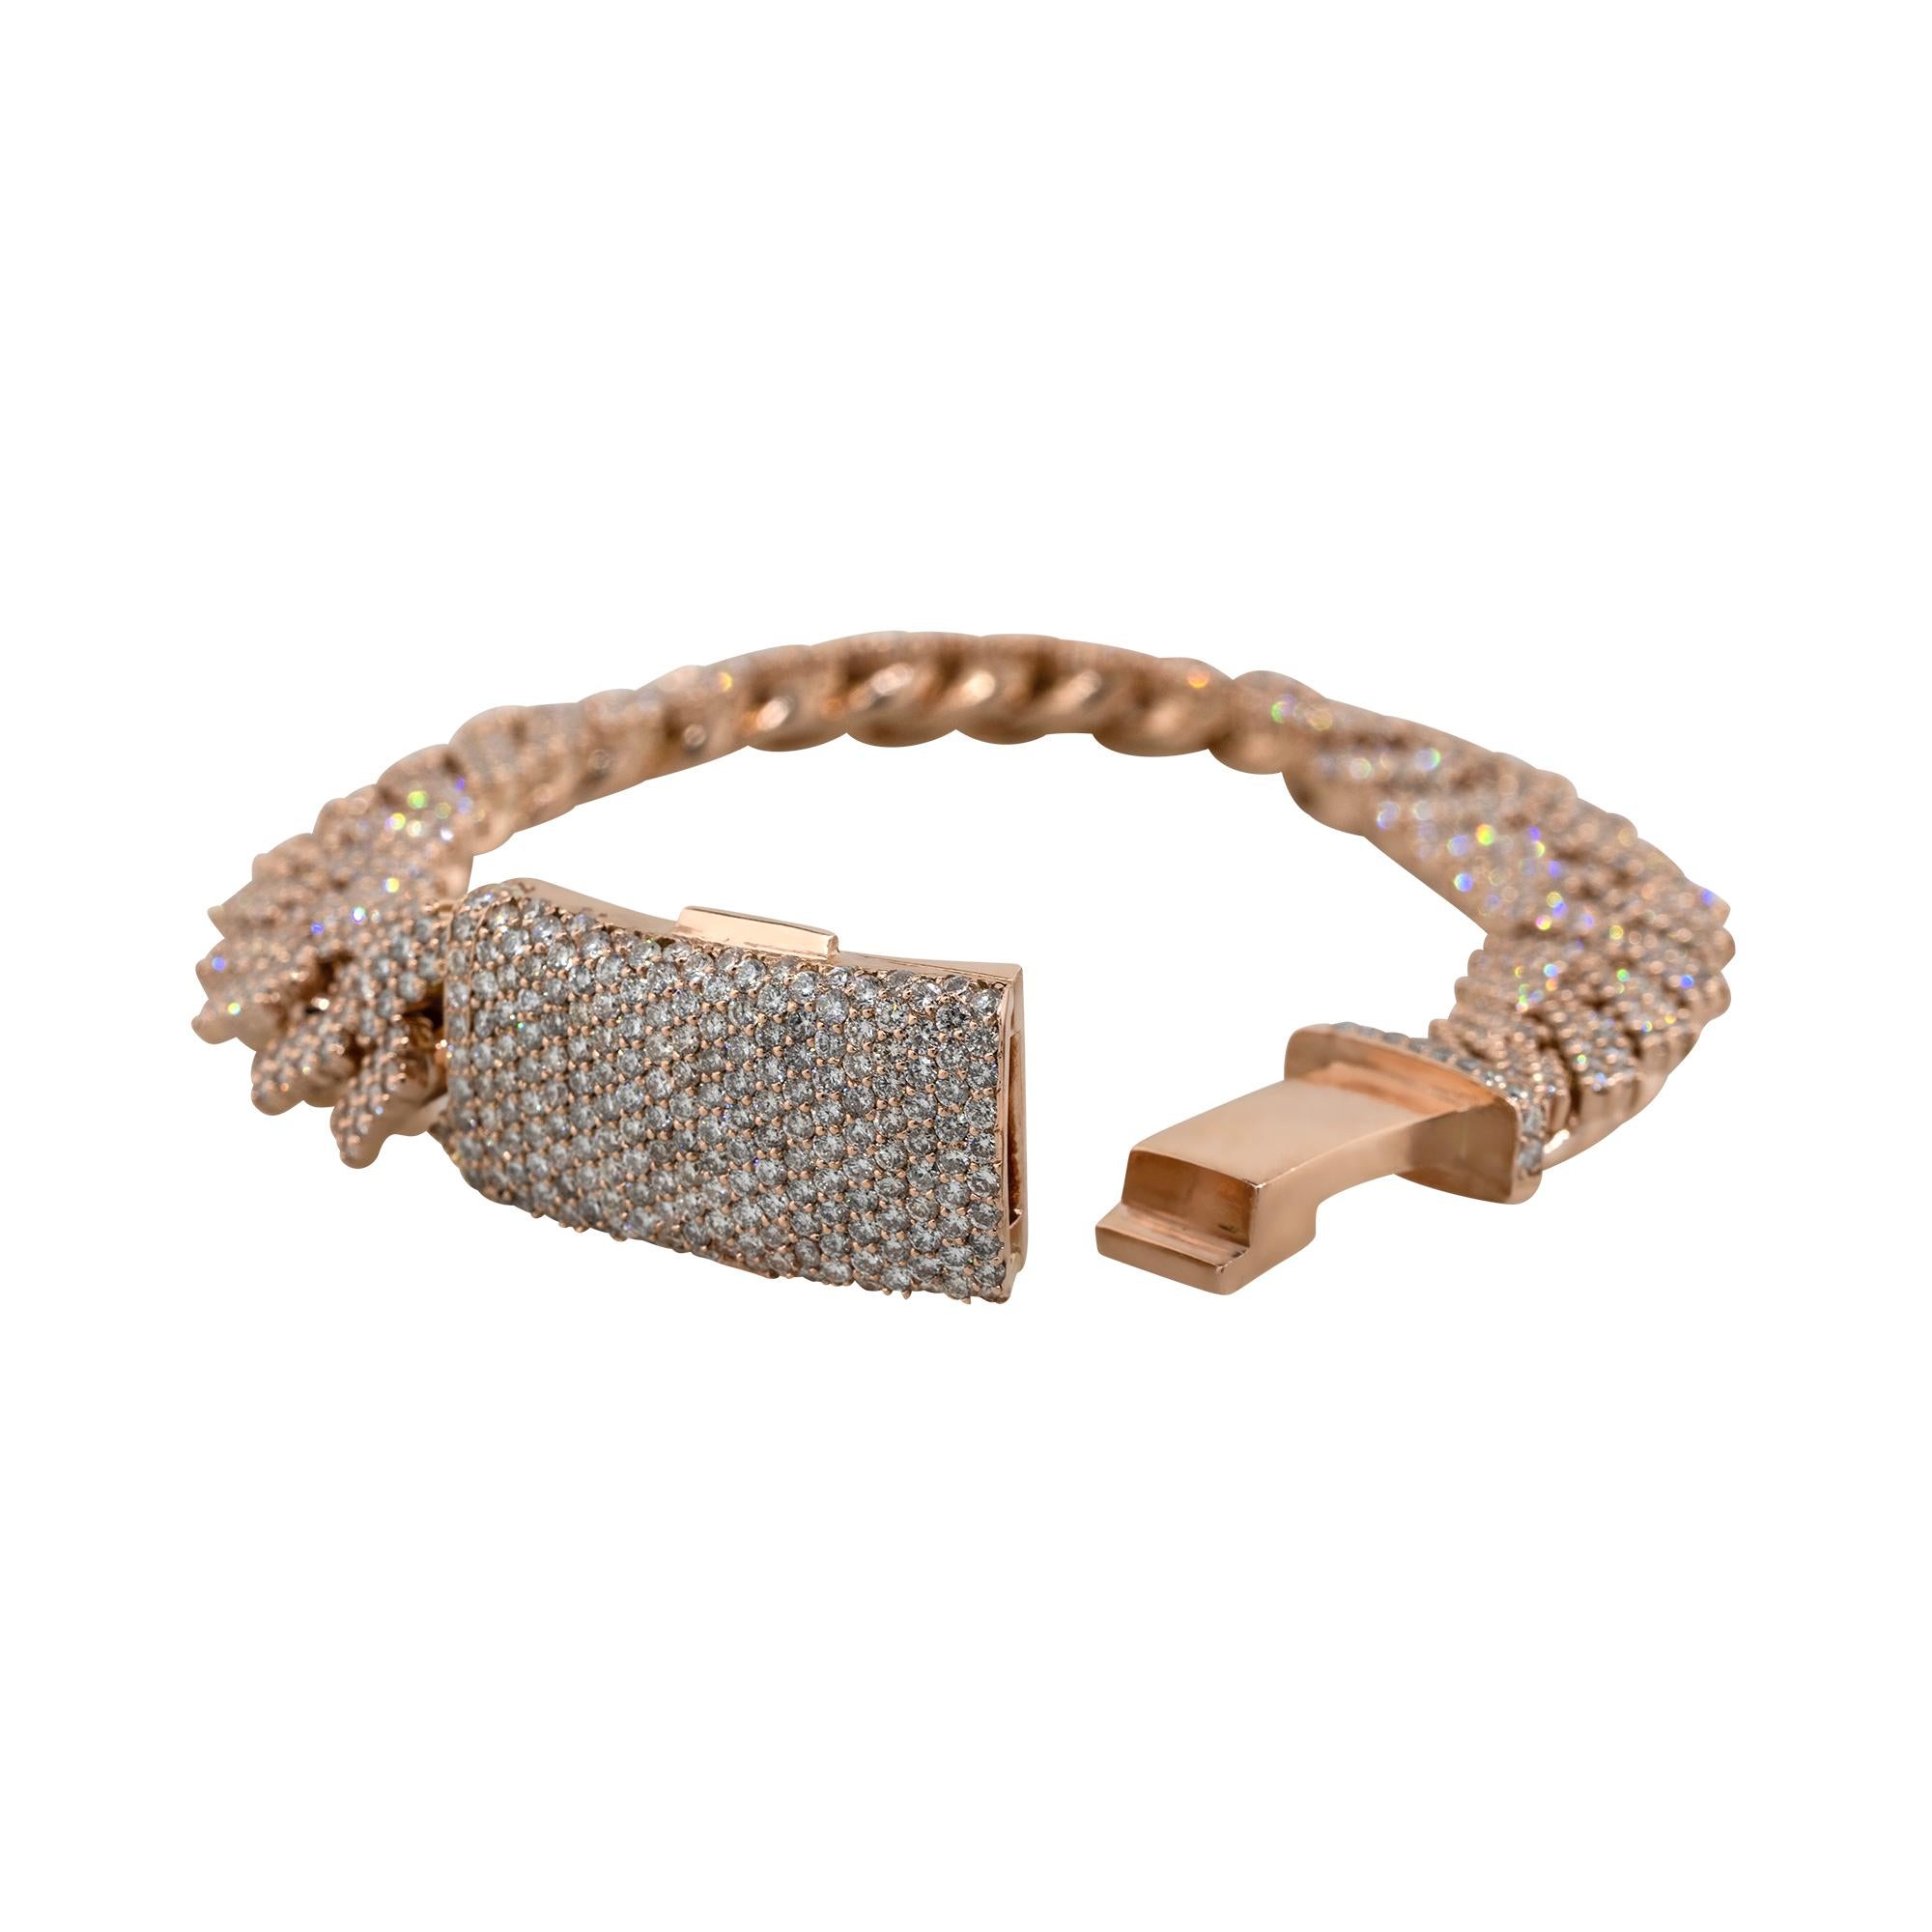 Material: 14k Rose Gold
Diamond Details: Approx. 20ctw of round cut Diamonds. Diamonds are G/H in color and VS in clarity
Clasp: Tongue in box with double safety latch
Measurements: measures 8